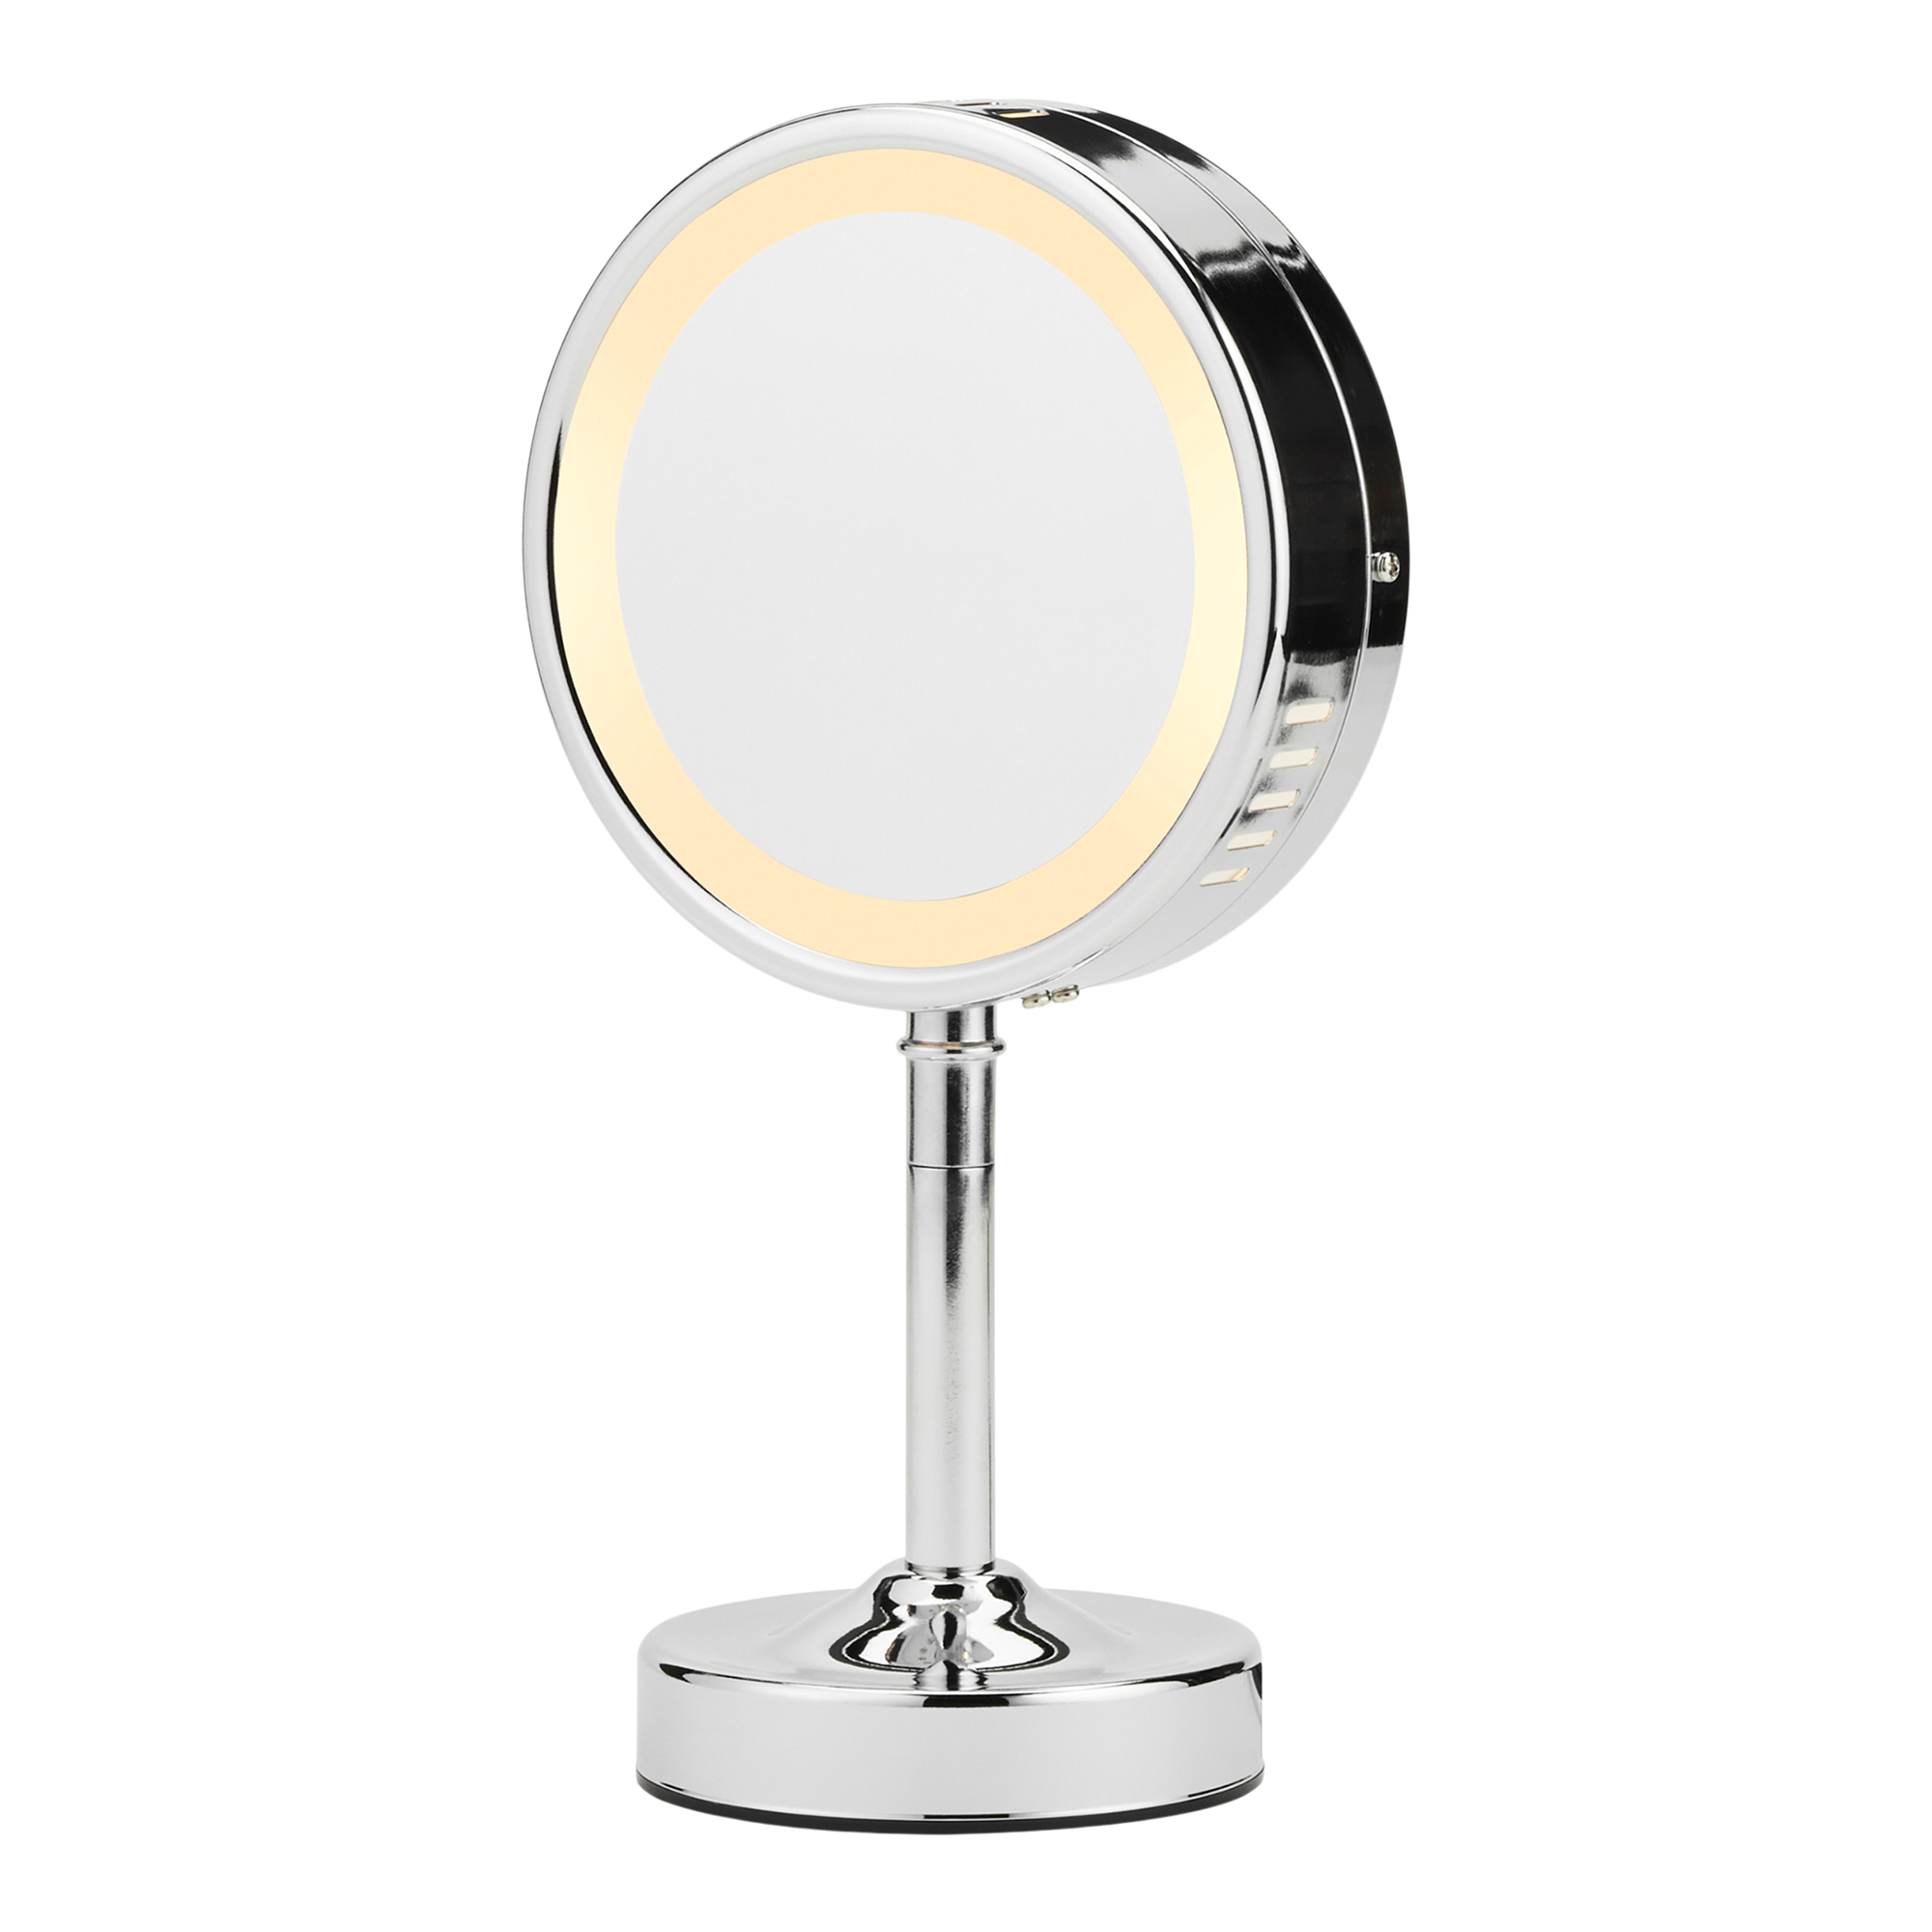 Reflections Double-Sided Lighted Round Mirror Conair Ulta Beauty